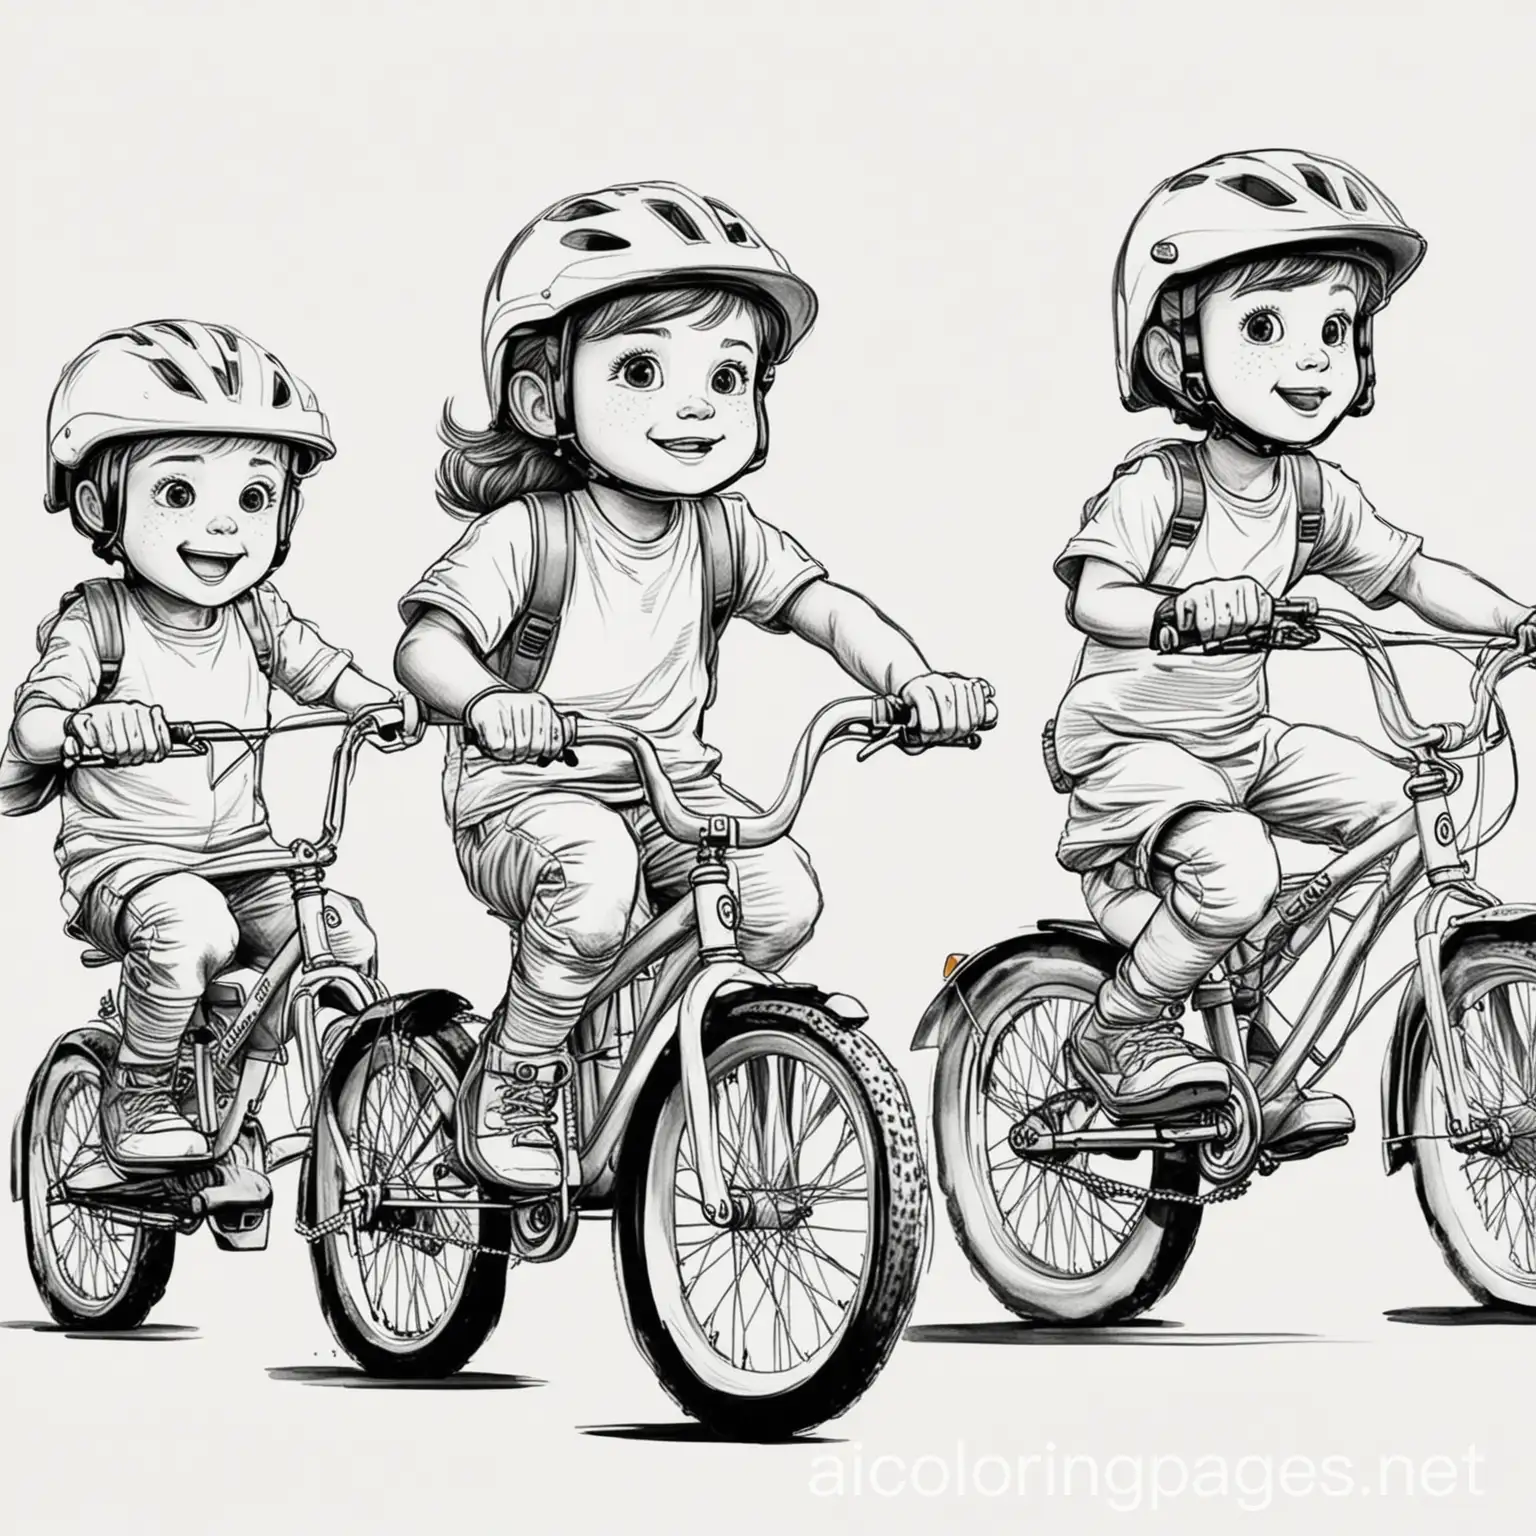 A group of kids riding bikes, all wearing helmets and knee pads, Coloring Page, black and white, line art, white background, Simplicity, Ample White Space. The background of the coloring page is plain white to make it easy for young children to color within the lines. The outlines of all the subjects are easy to distinguish, making it simple for kids to color without too much difficulty